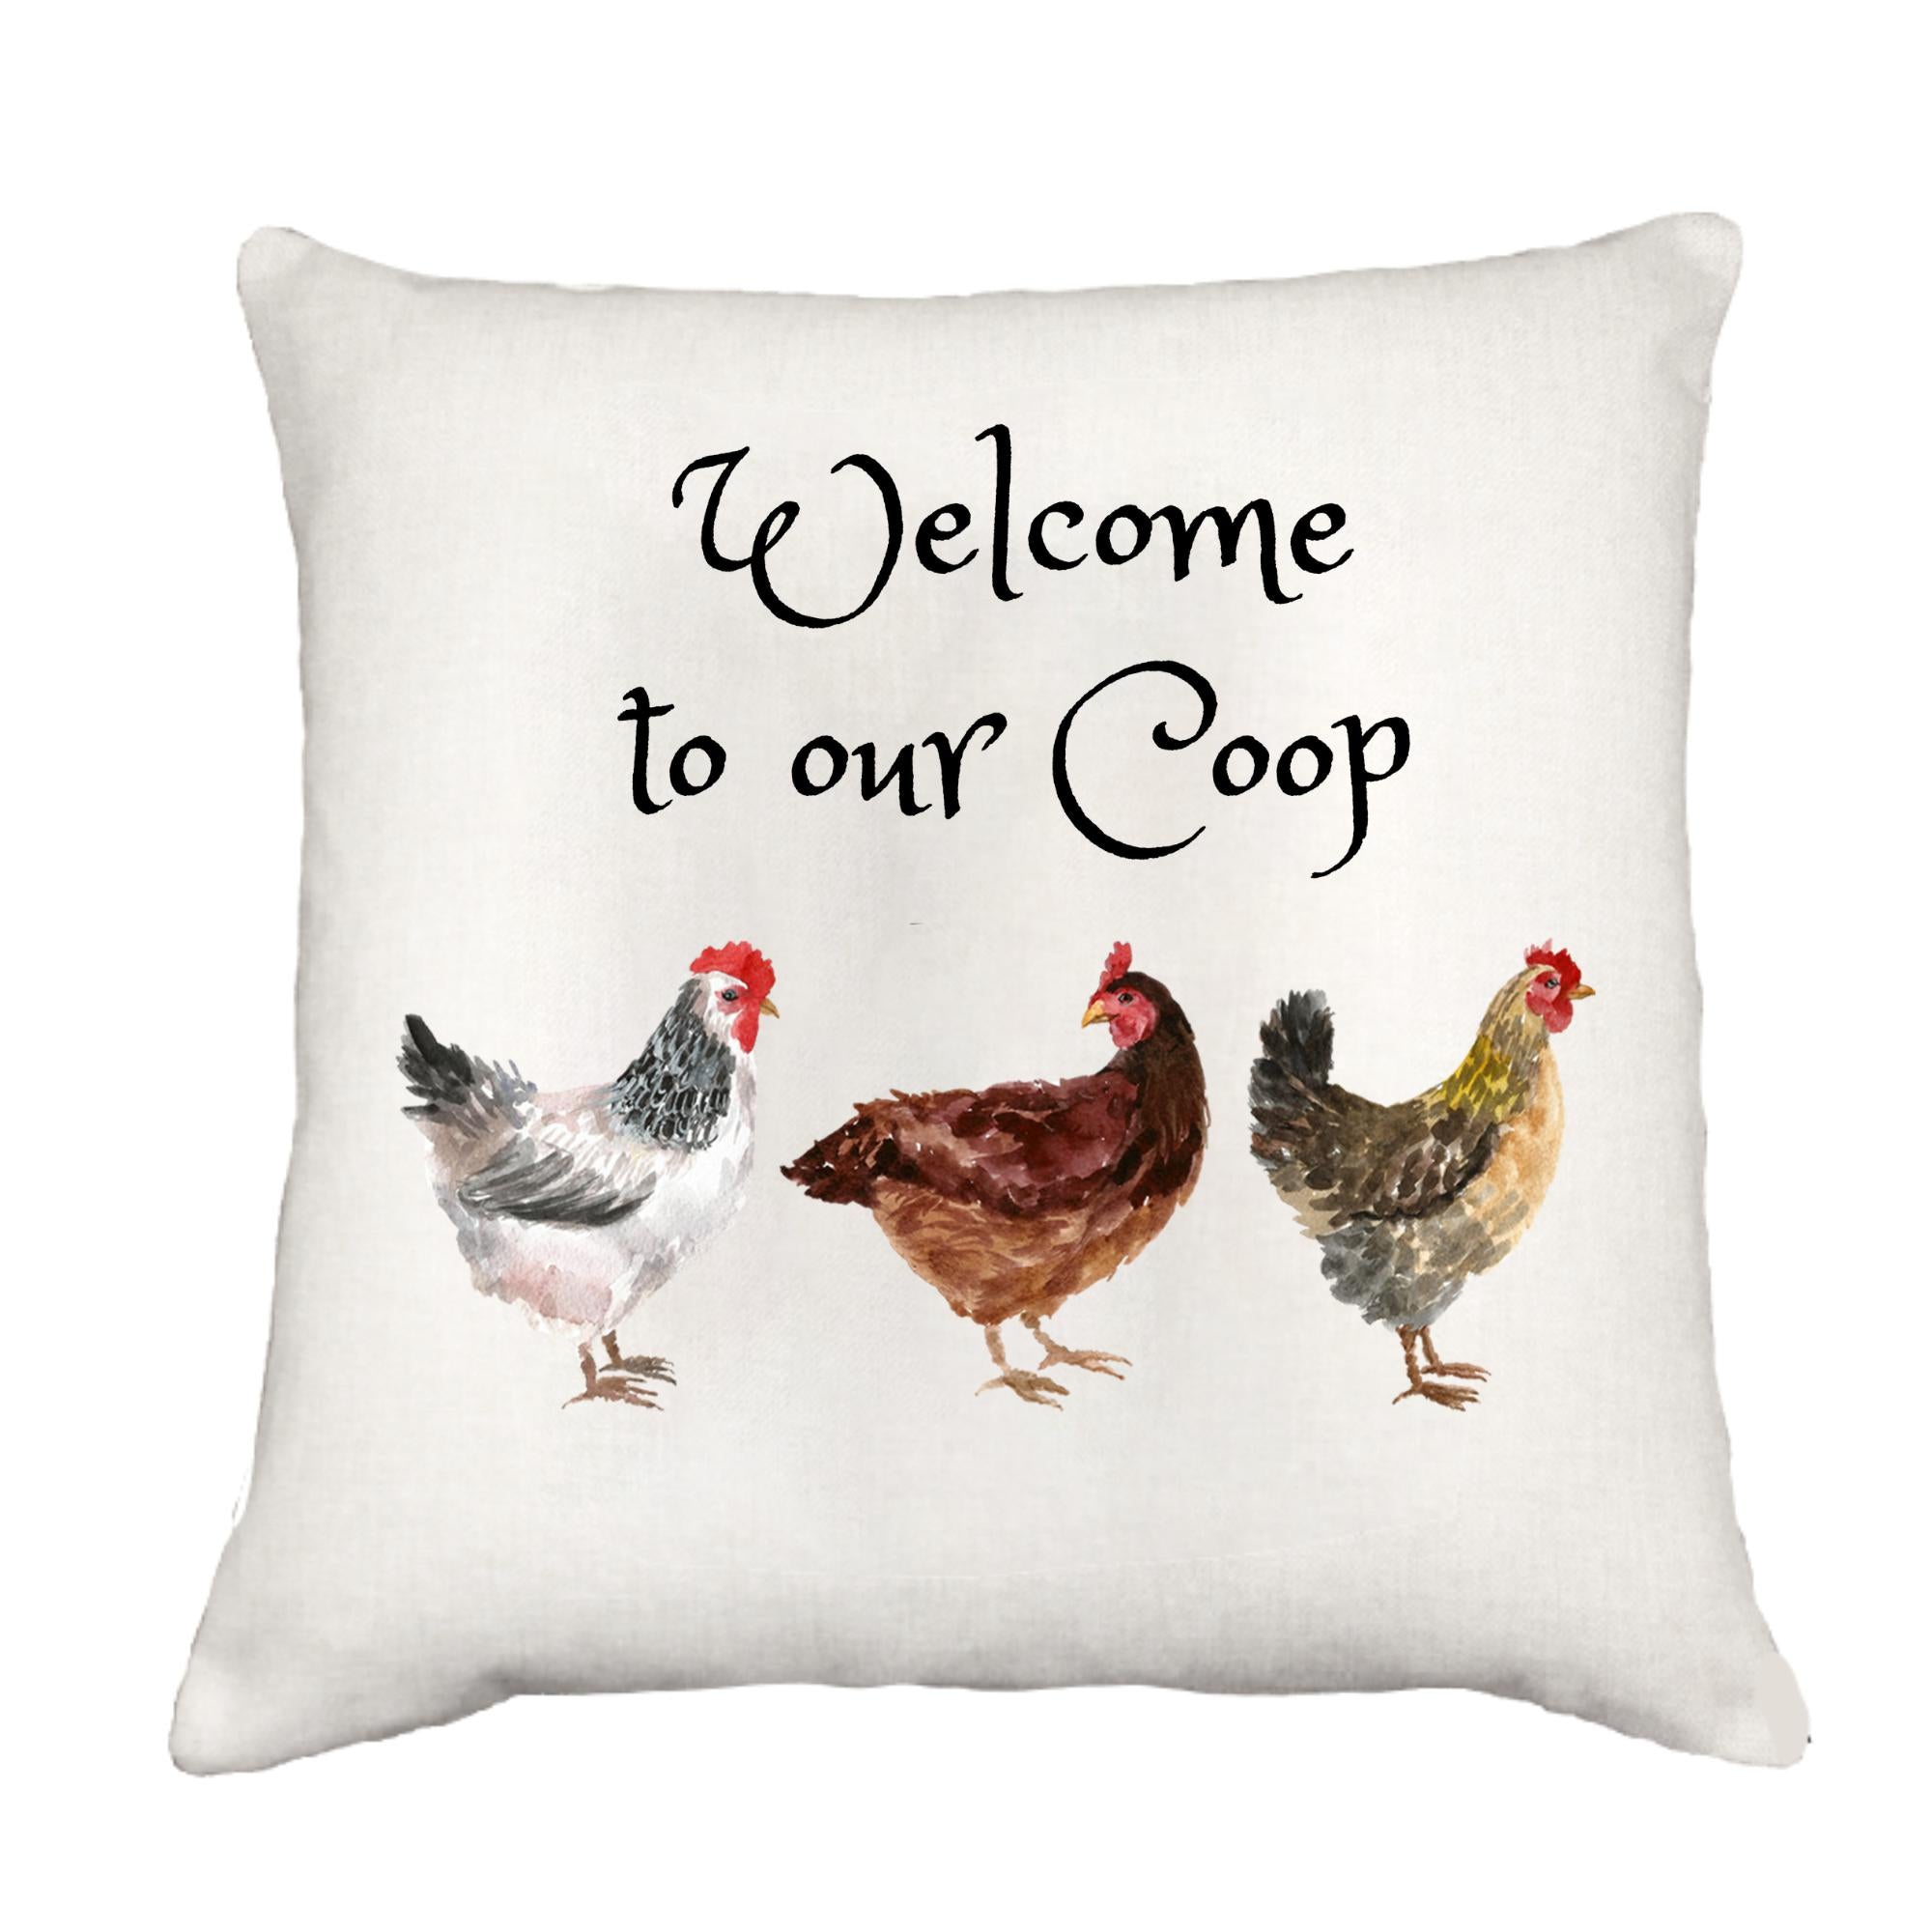 Welcome To Our Coop Down Pillow